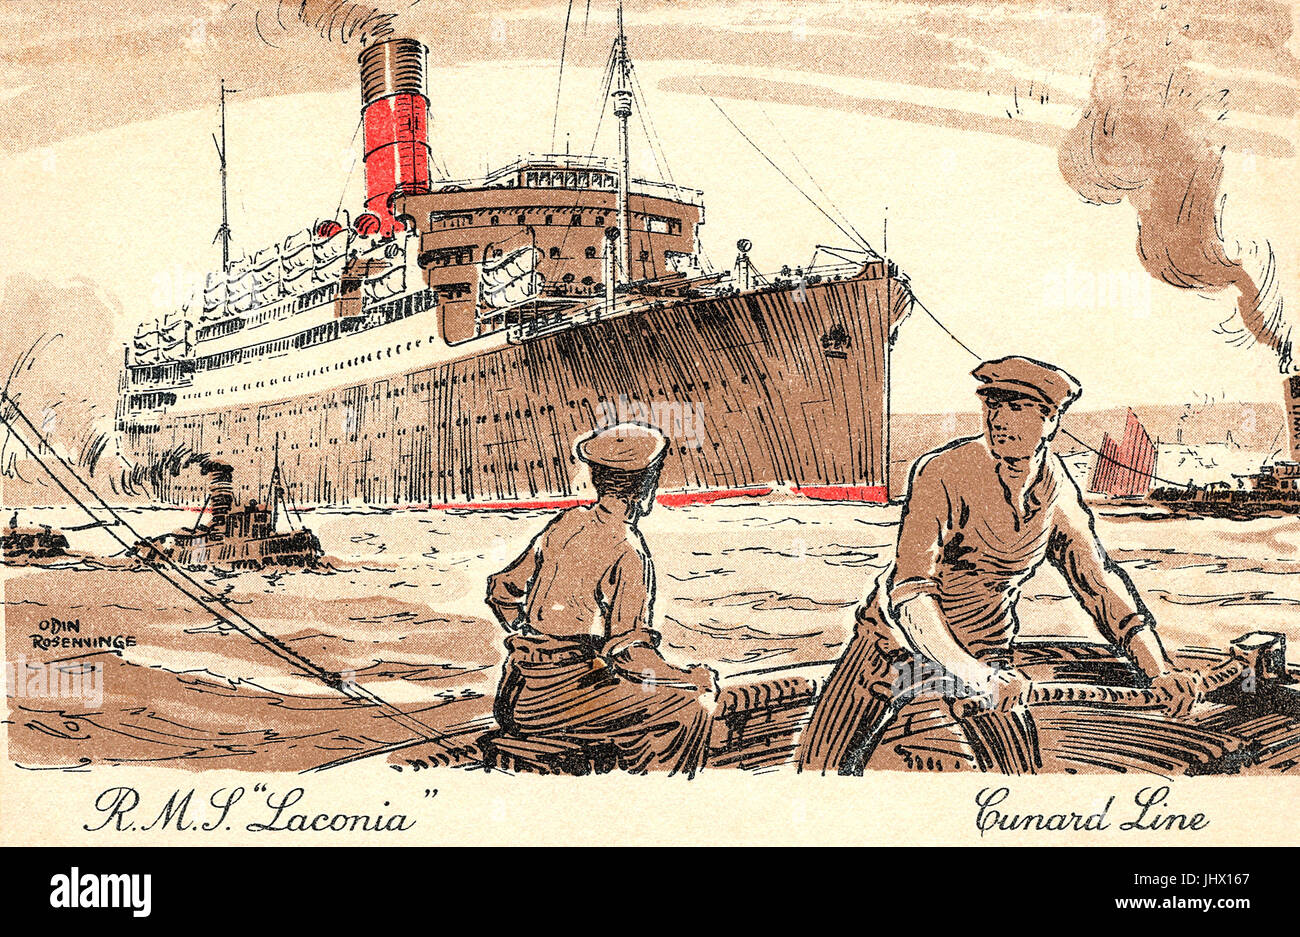 Vintage postcard of the Cunard ship the R.M.S. Laconia, illustrated by Odin Rosenvinge. The RMS Laconia was launched in 1921 and sunk by U-Boat in 1942 in what became known as The Laconia Incident. Stock Photo